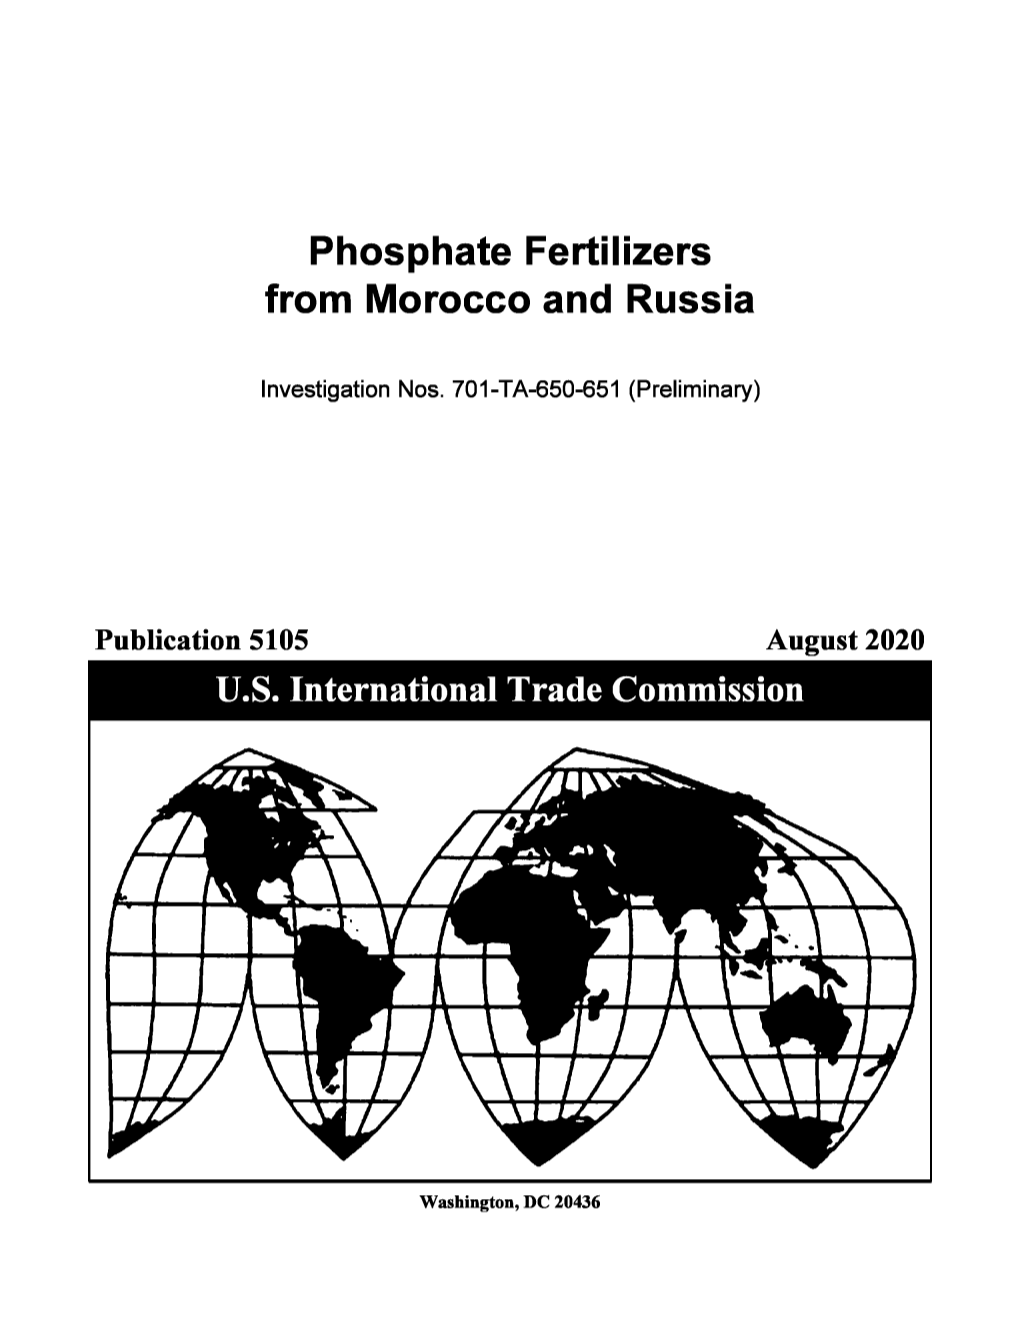 Phosphate Fertilizers from Morocco and Russia-Staff Report